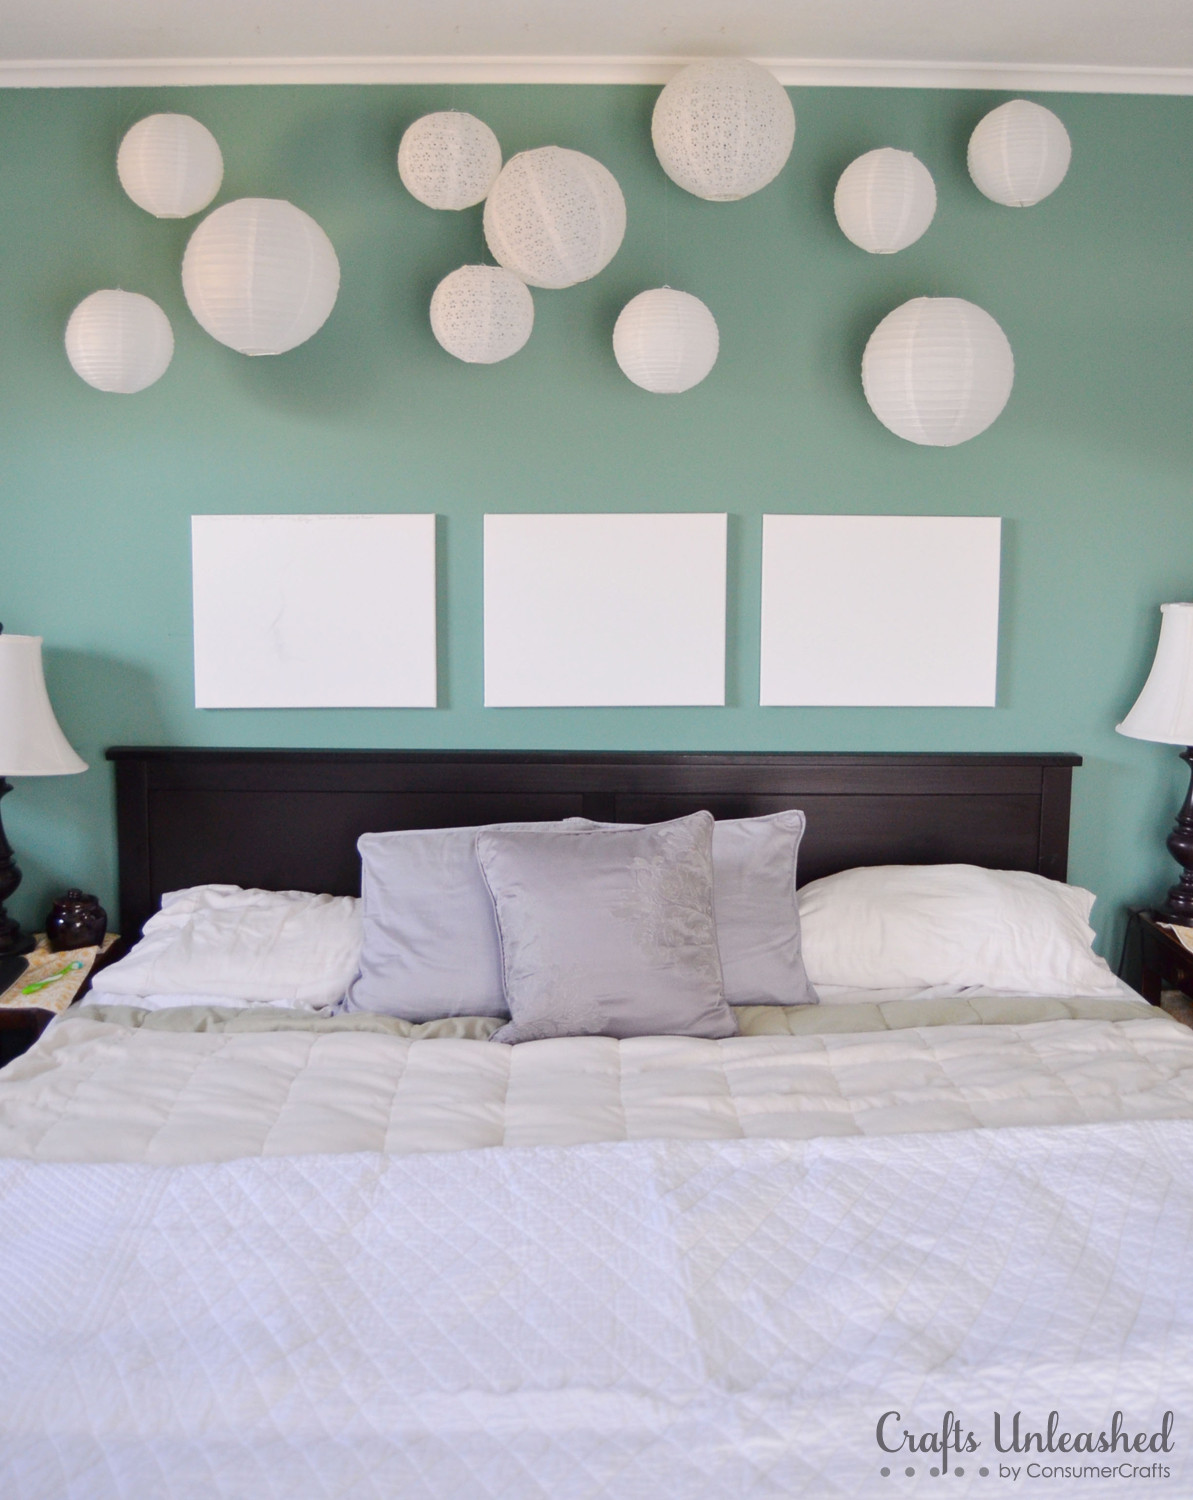 Paper Lantern Lights For Bedroom
 Create a Fun & Whimsical Wall Installation with Paper Lanterns